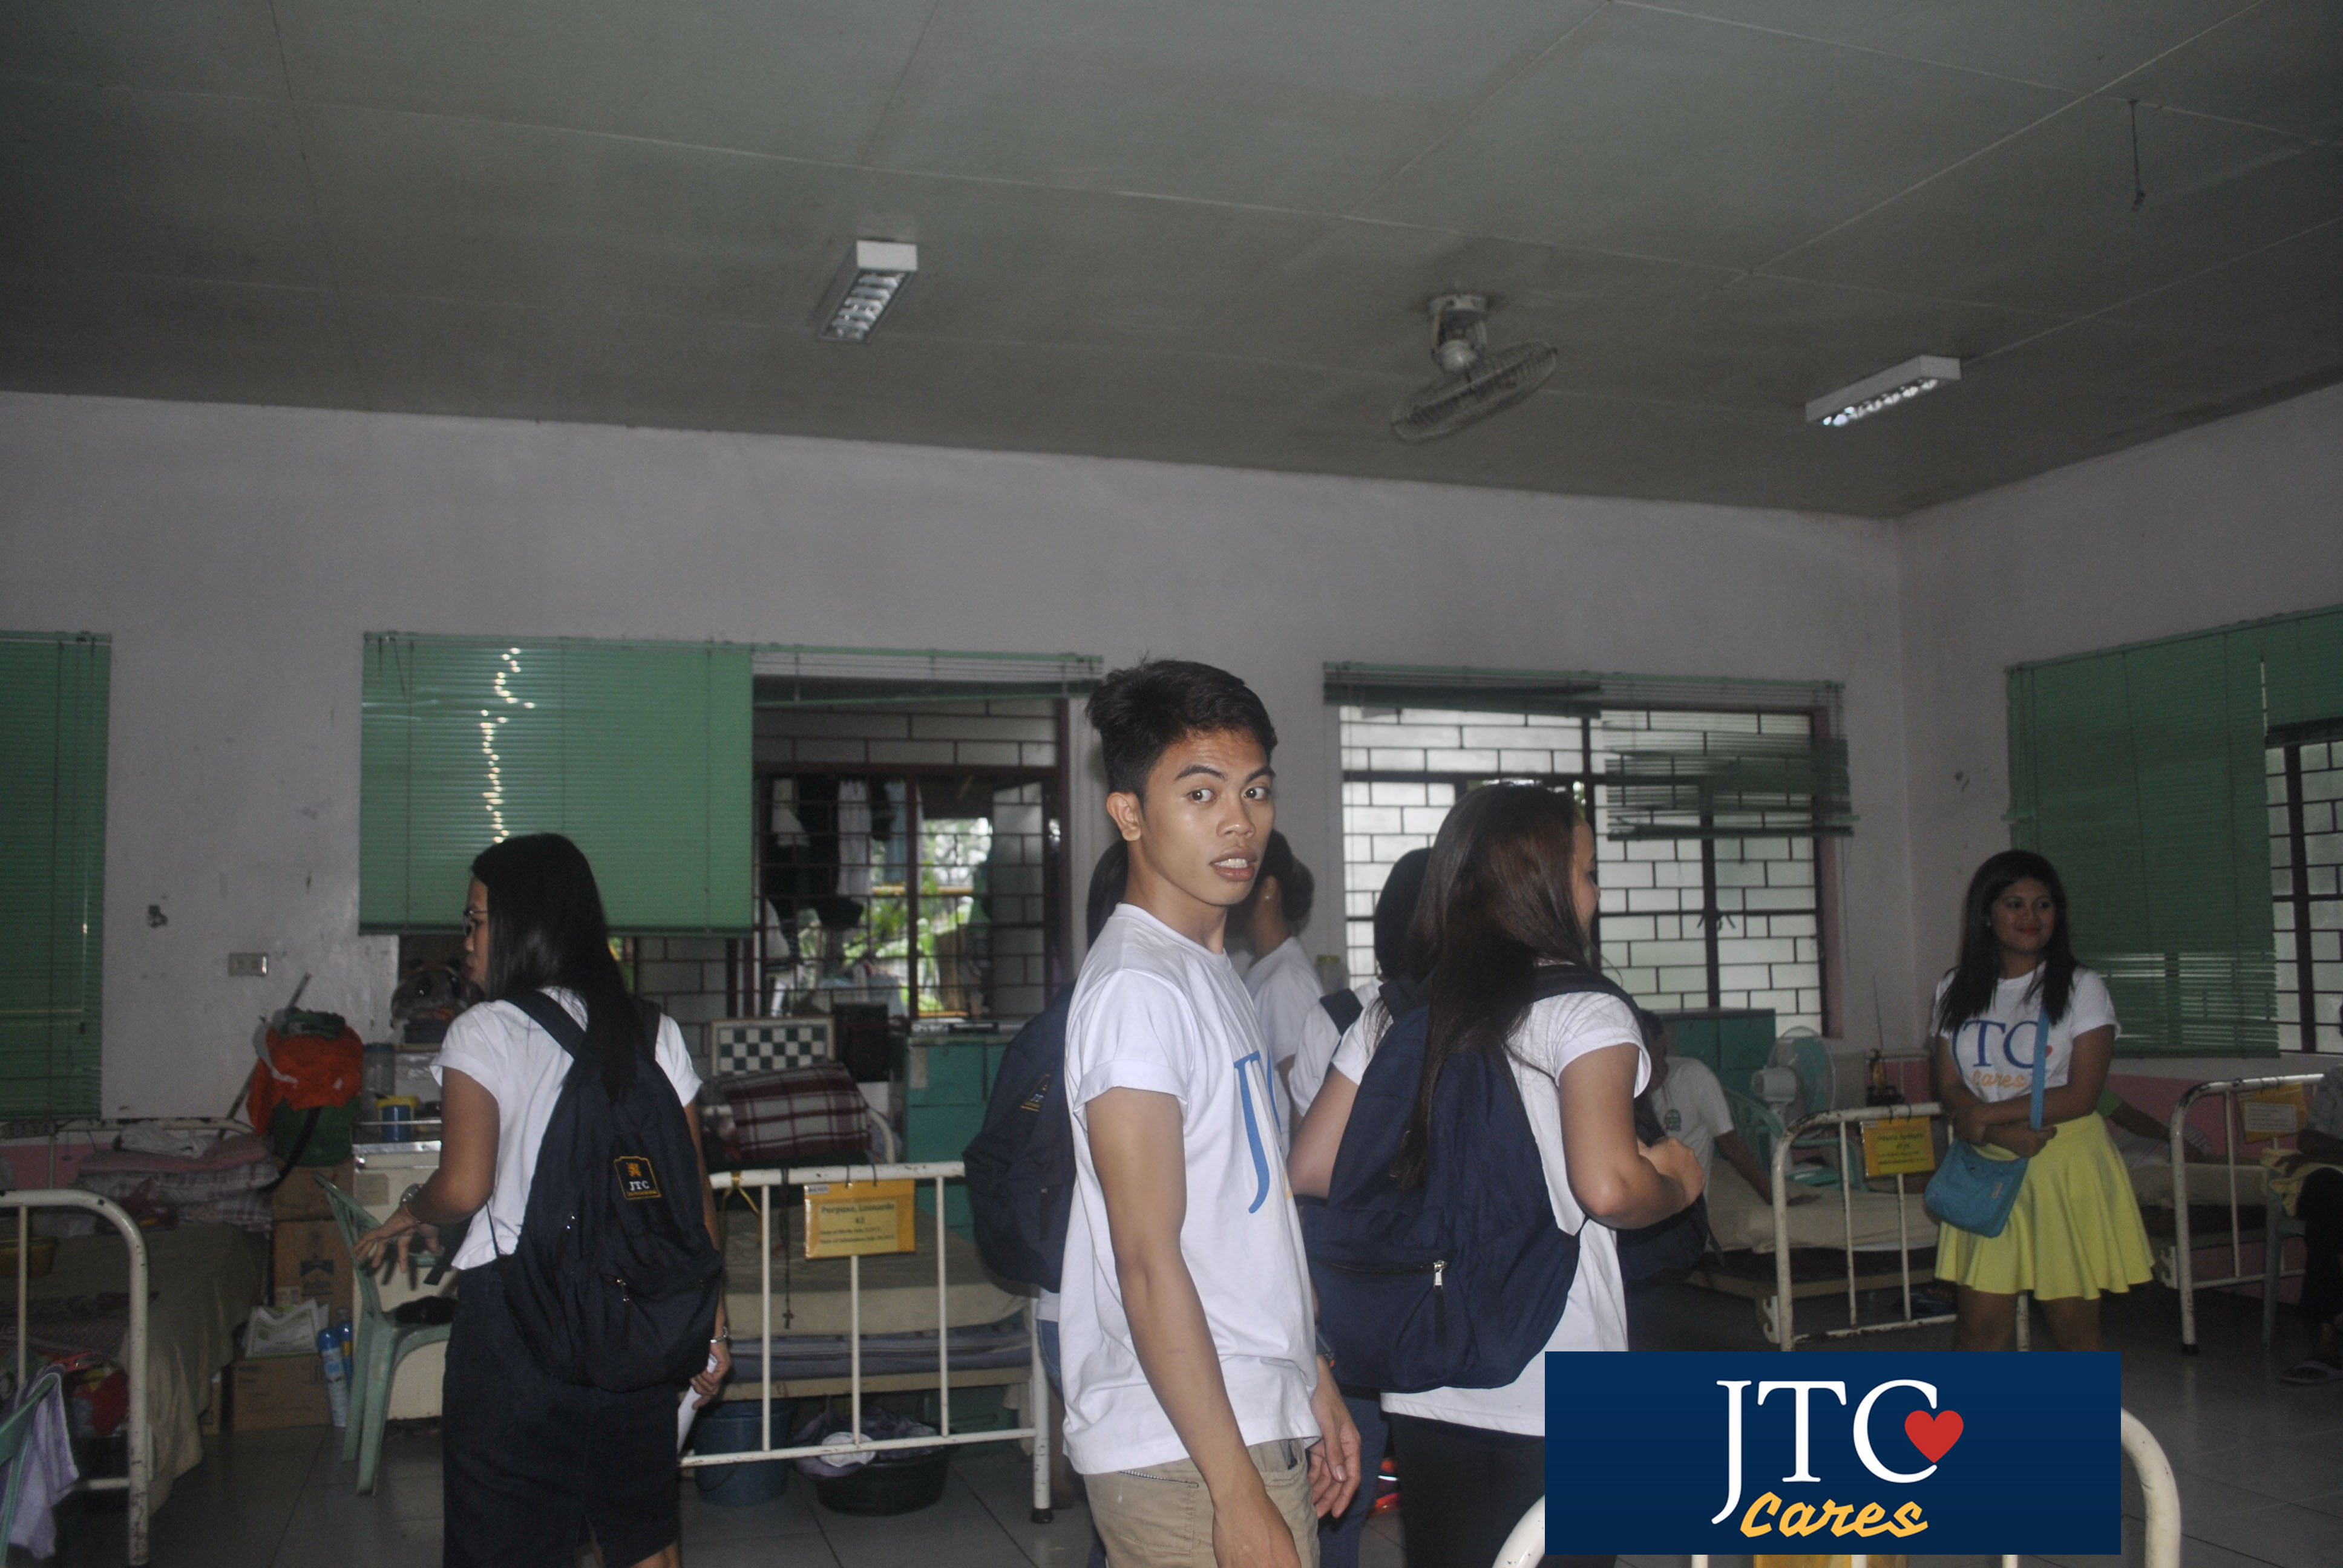 JTC cares - visiting the patients, lifting their esteem and providing them some gifts.